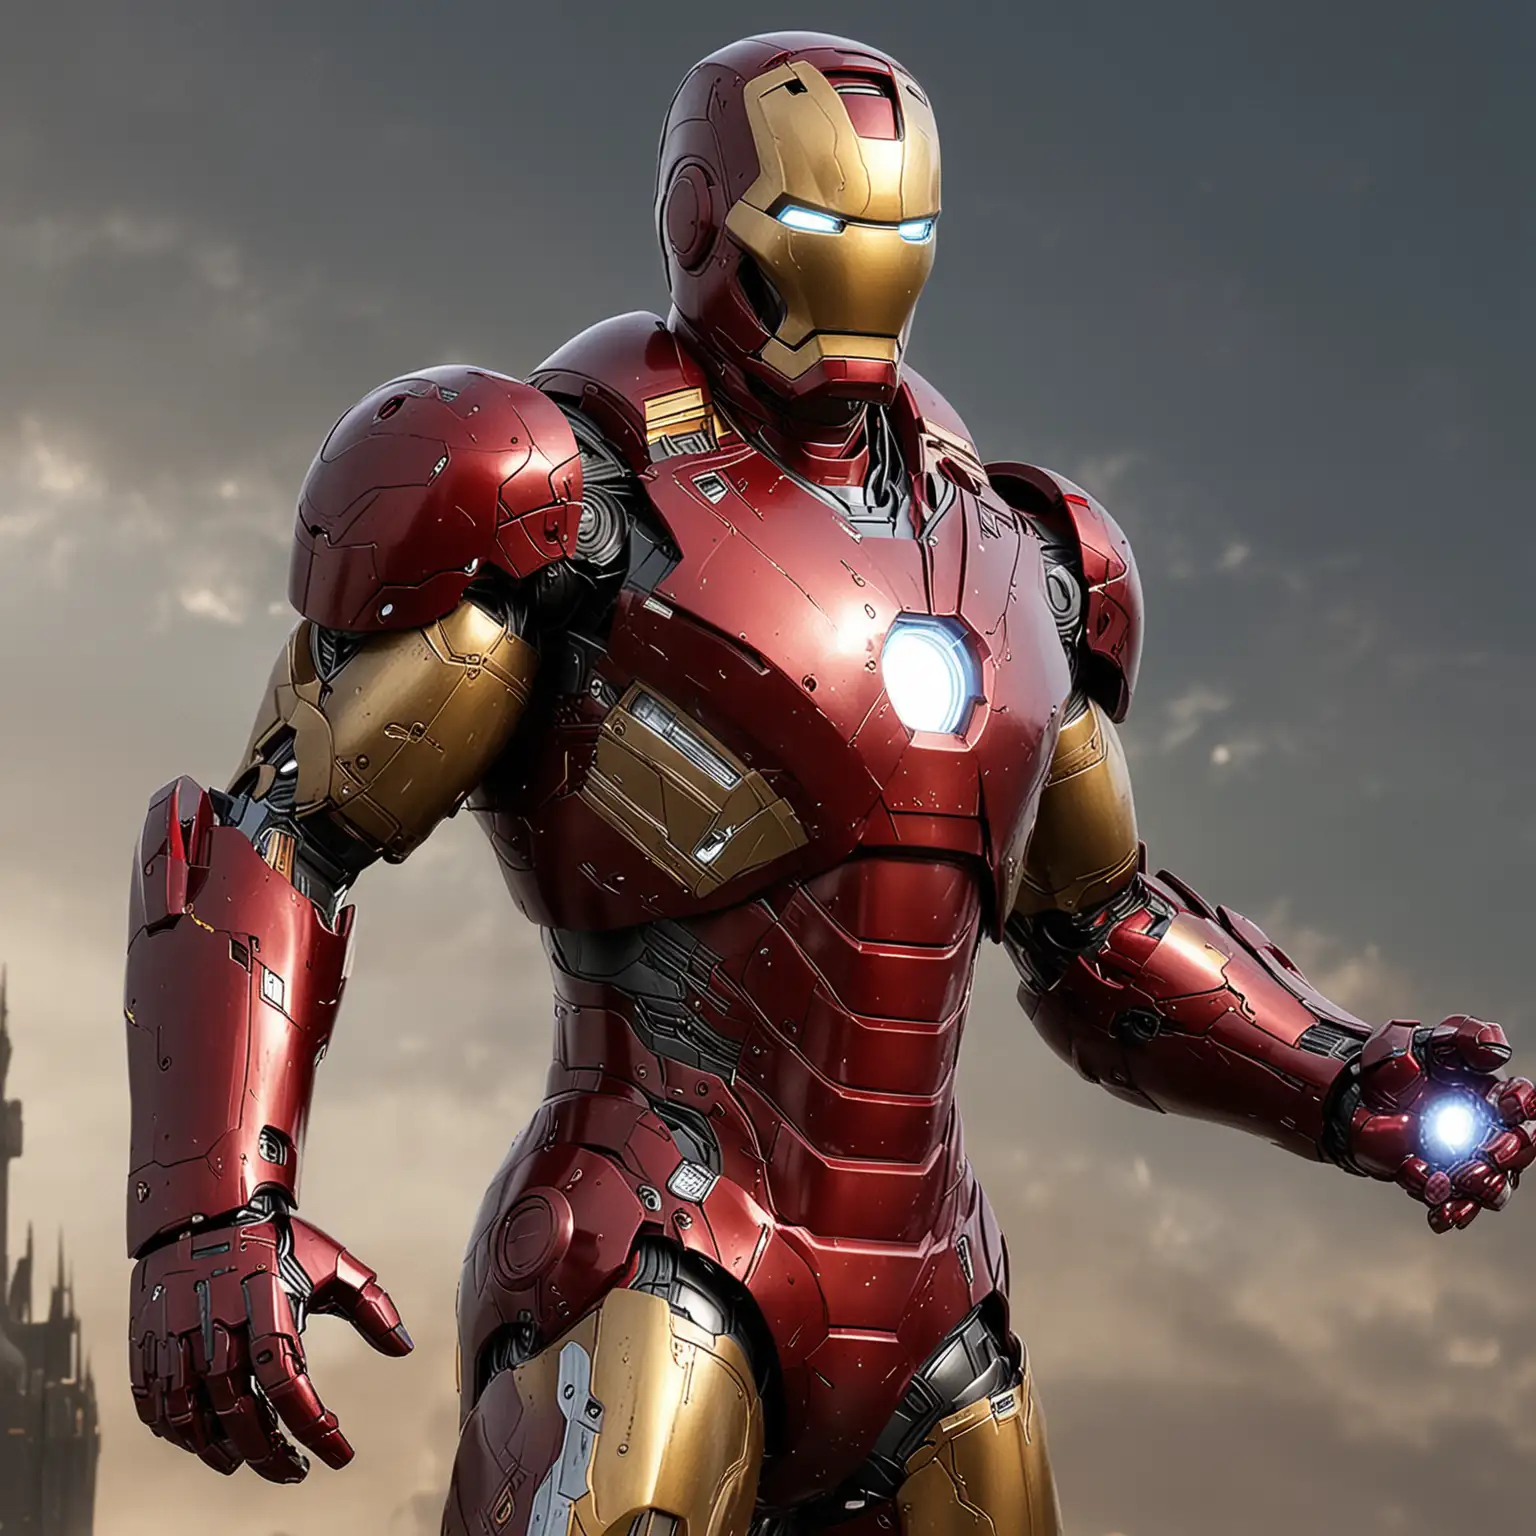 Iron-Man-Wearing-Thanosbuster-Armor-Ready-for-Battle